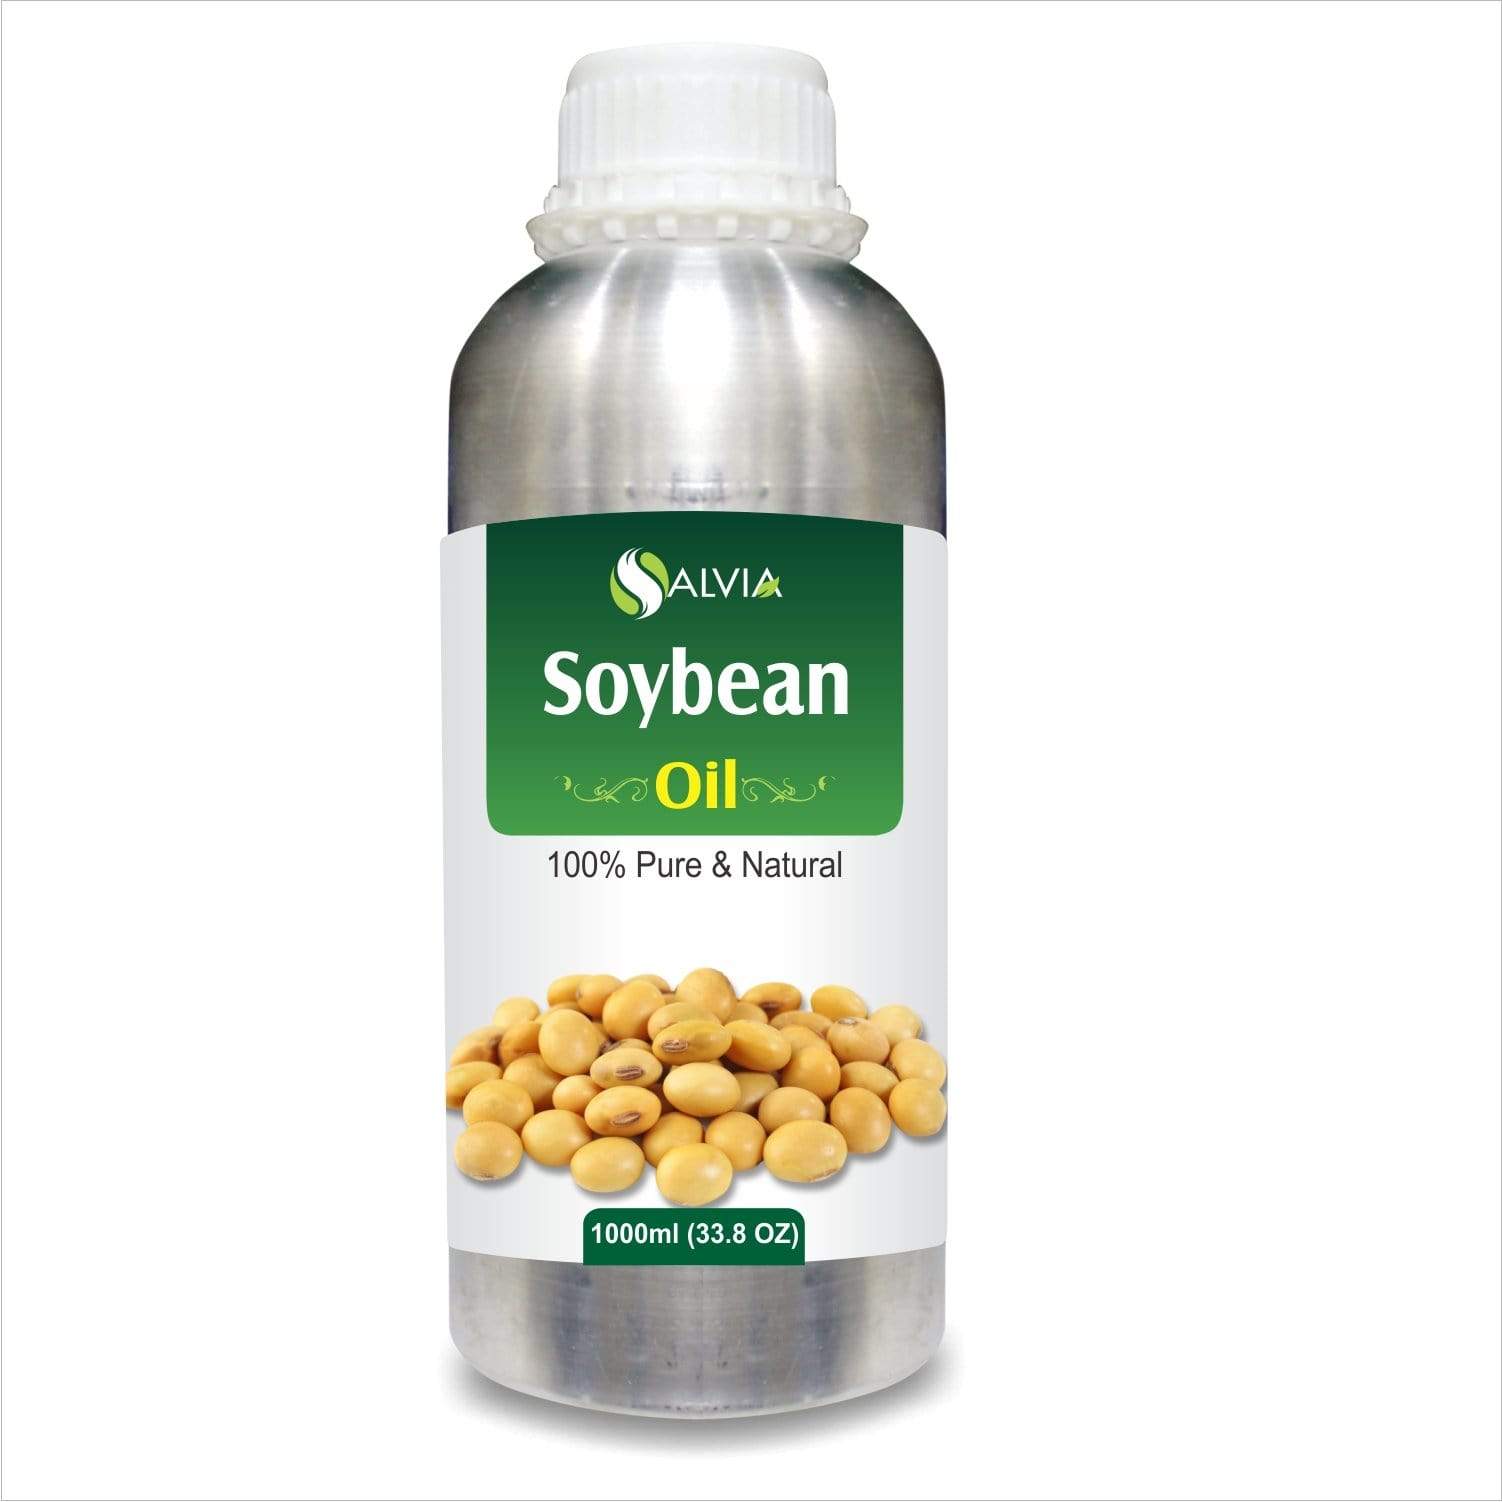 Salvia Natural Carrier Oils 1000ml Soybean Oil (Glycine Max) 100% Natural Carrier Oil, Moisturizes The Skin, Solves Itchy Scalp, Antioxidant & Rich in Vitamin E, Best For Aromatherapy